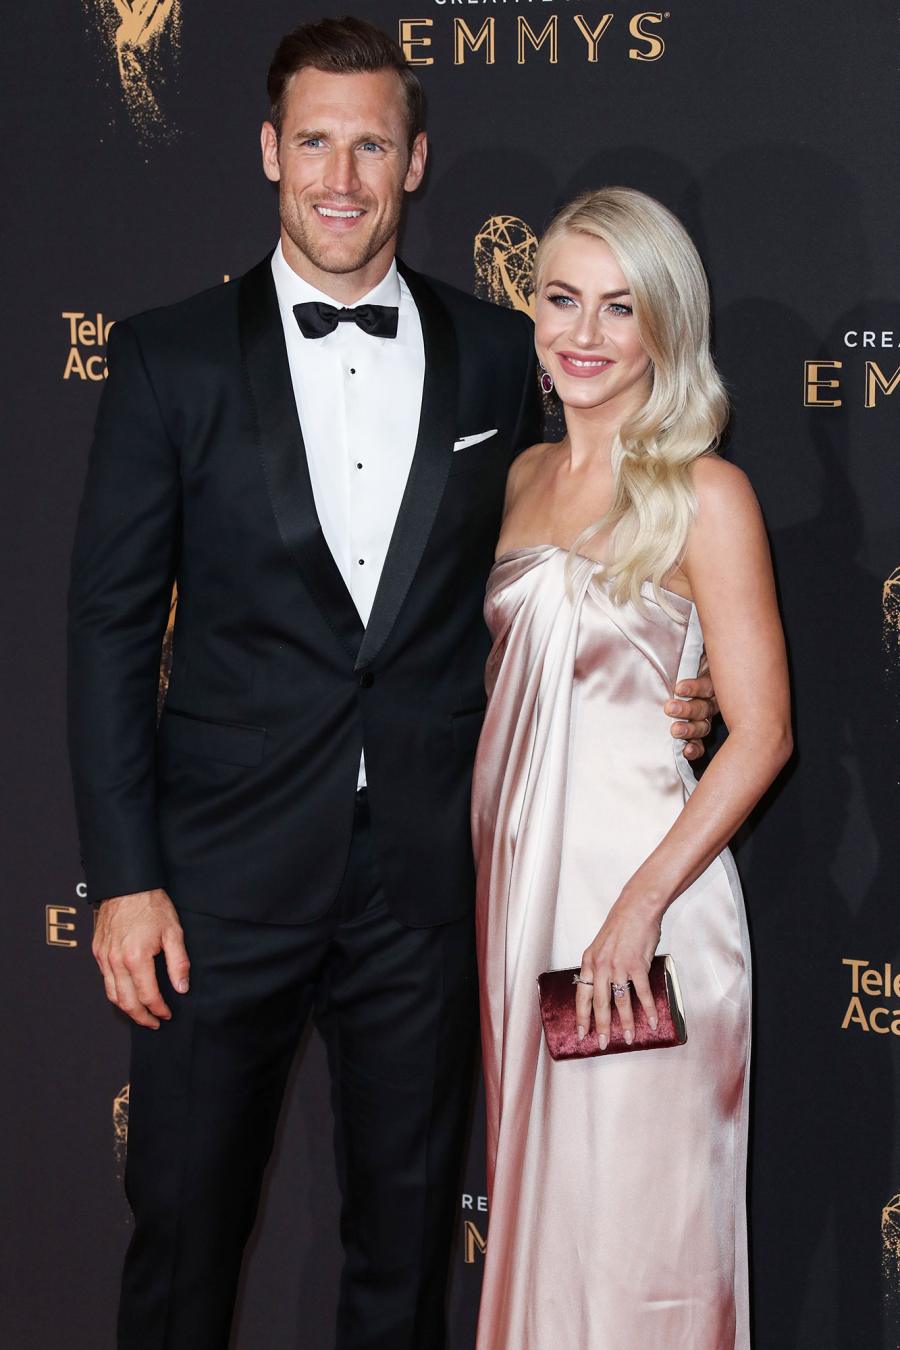 Julianne Hough and Brooks Laich The Way They Were Timeline